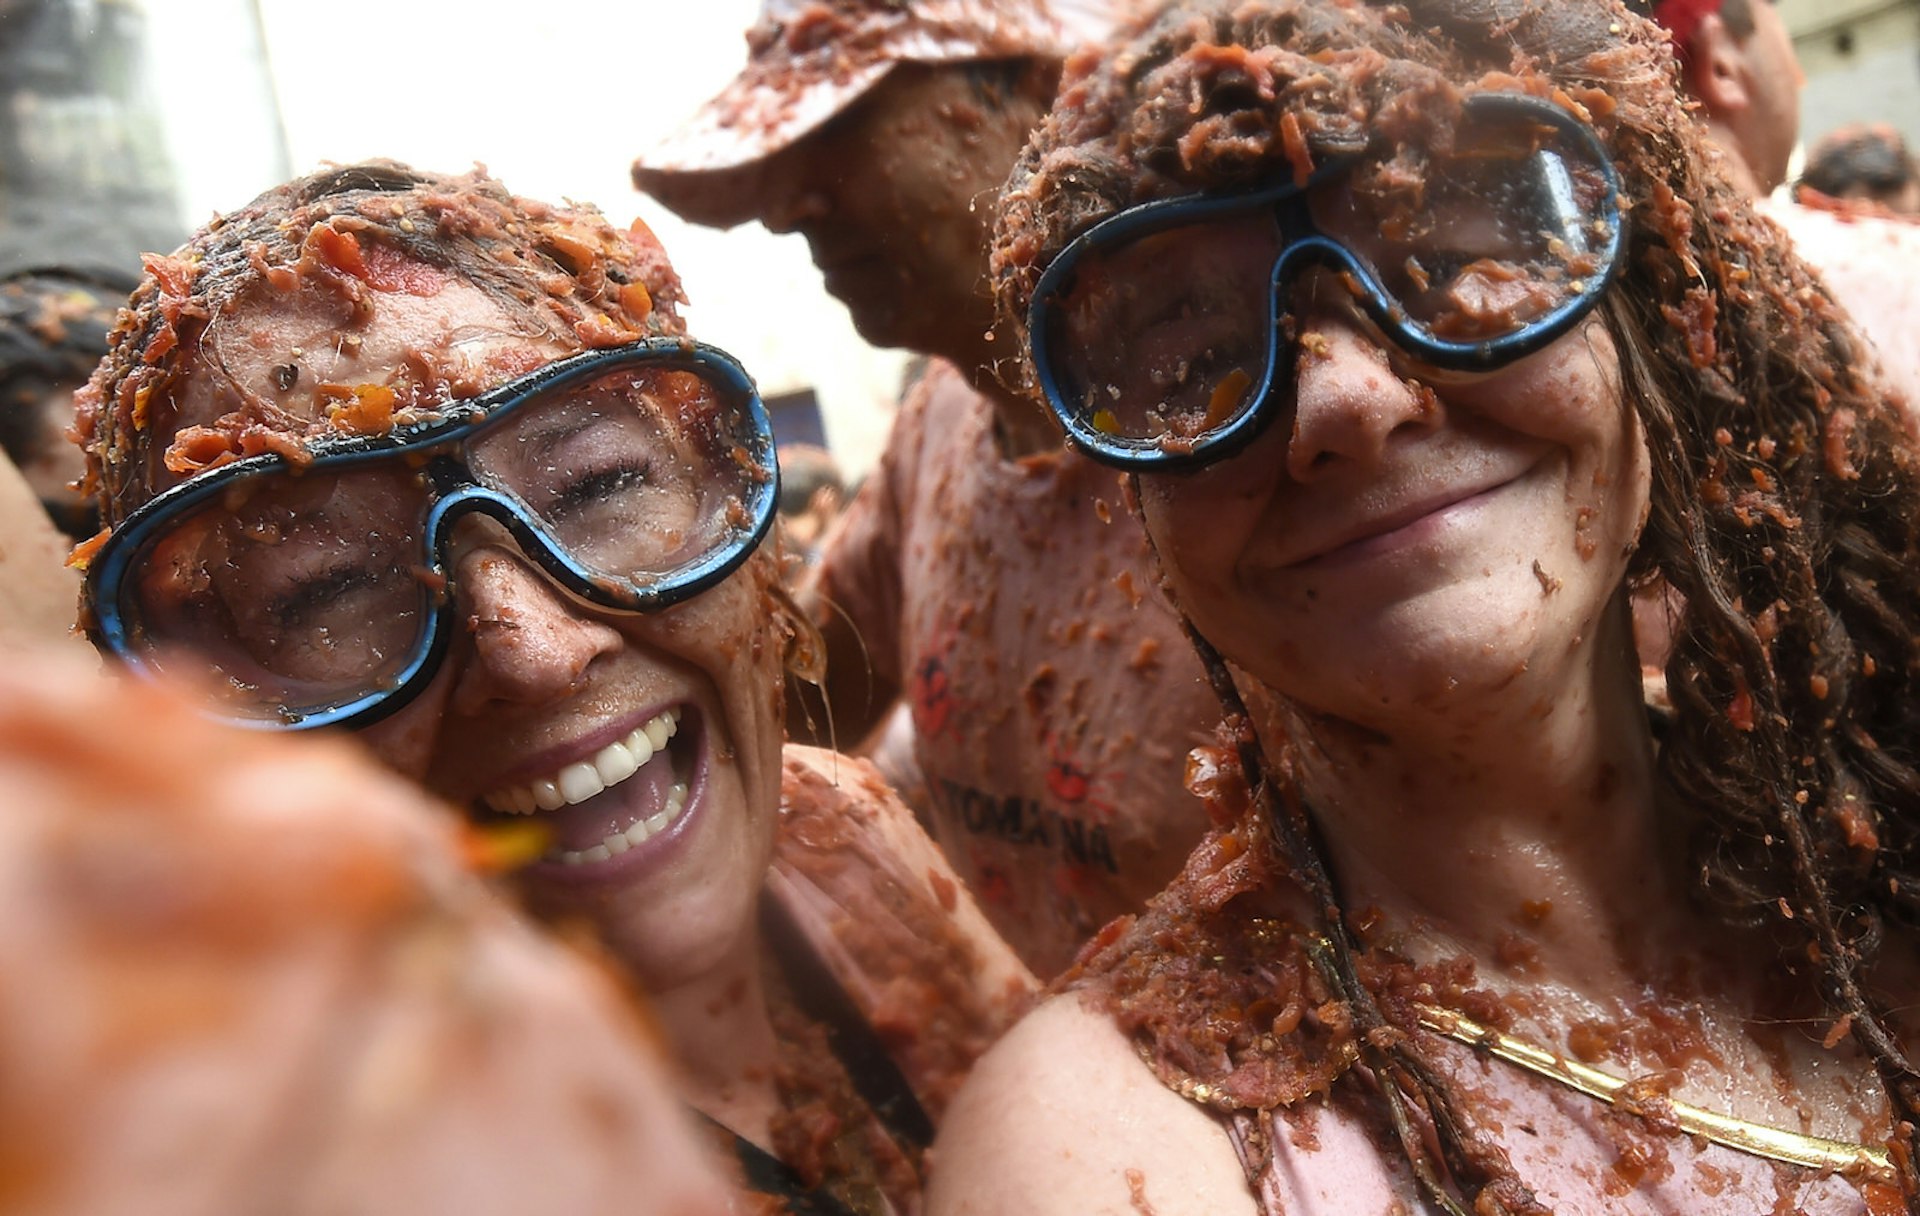 Two revellers sporting diving masks pose covered up with smashed tomatoes, during the 'Tomatina' festival in Bunol, on August 29, 2018. - This iconic annual fiesta that takes place on the last Wednesday of August and has been billed as "the world's biggest food fight". Two festival goers wear snorkelling goggles to protect their eyes from the tomato pulp